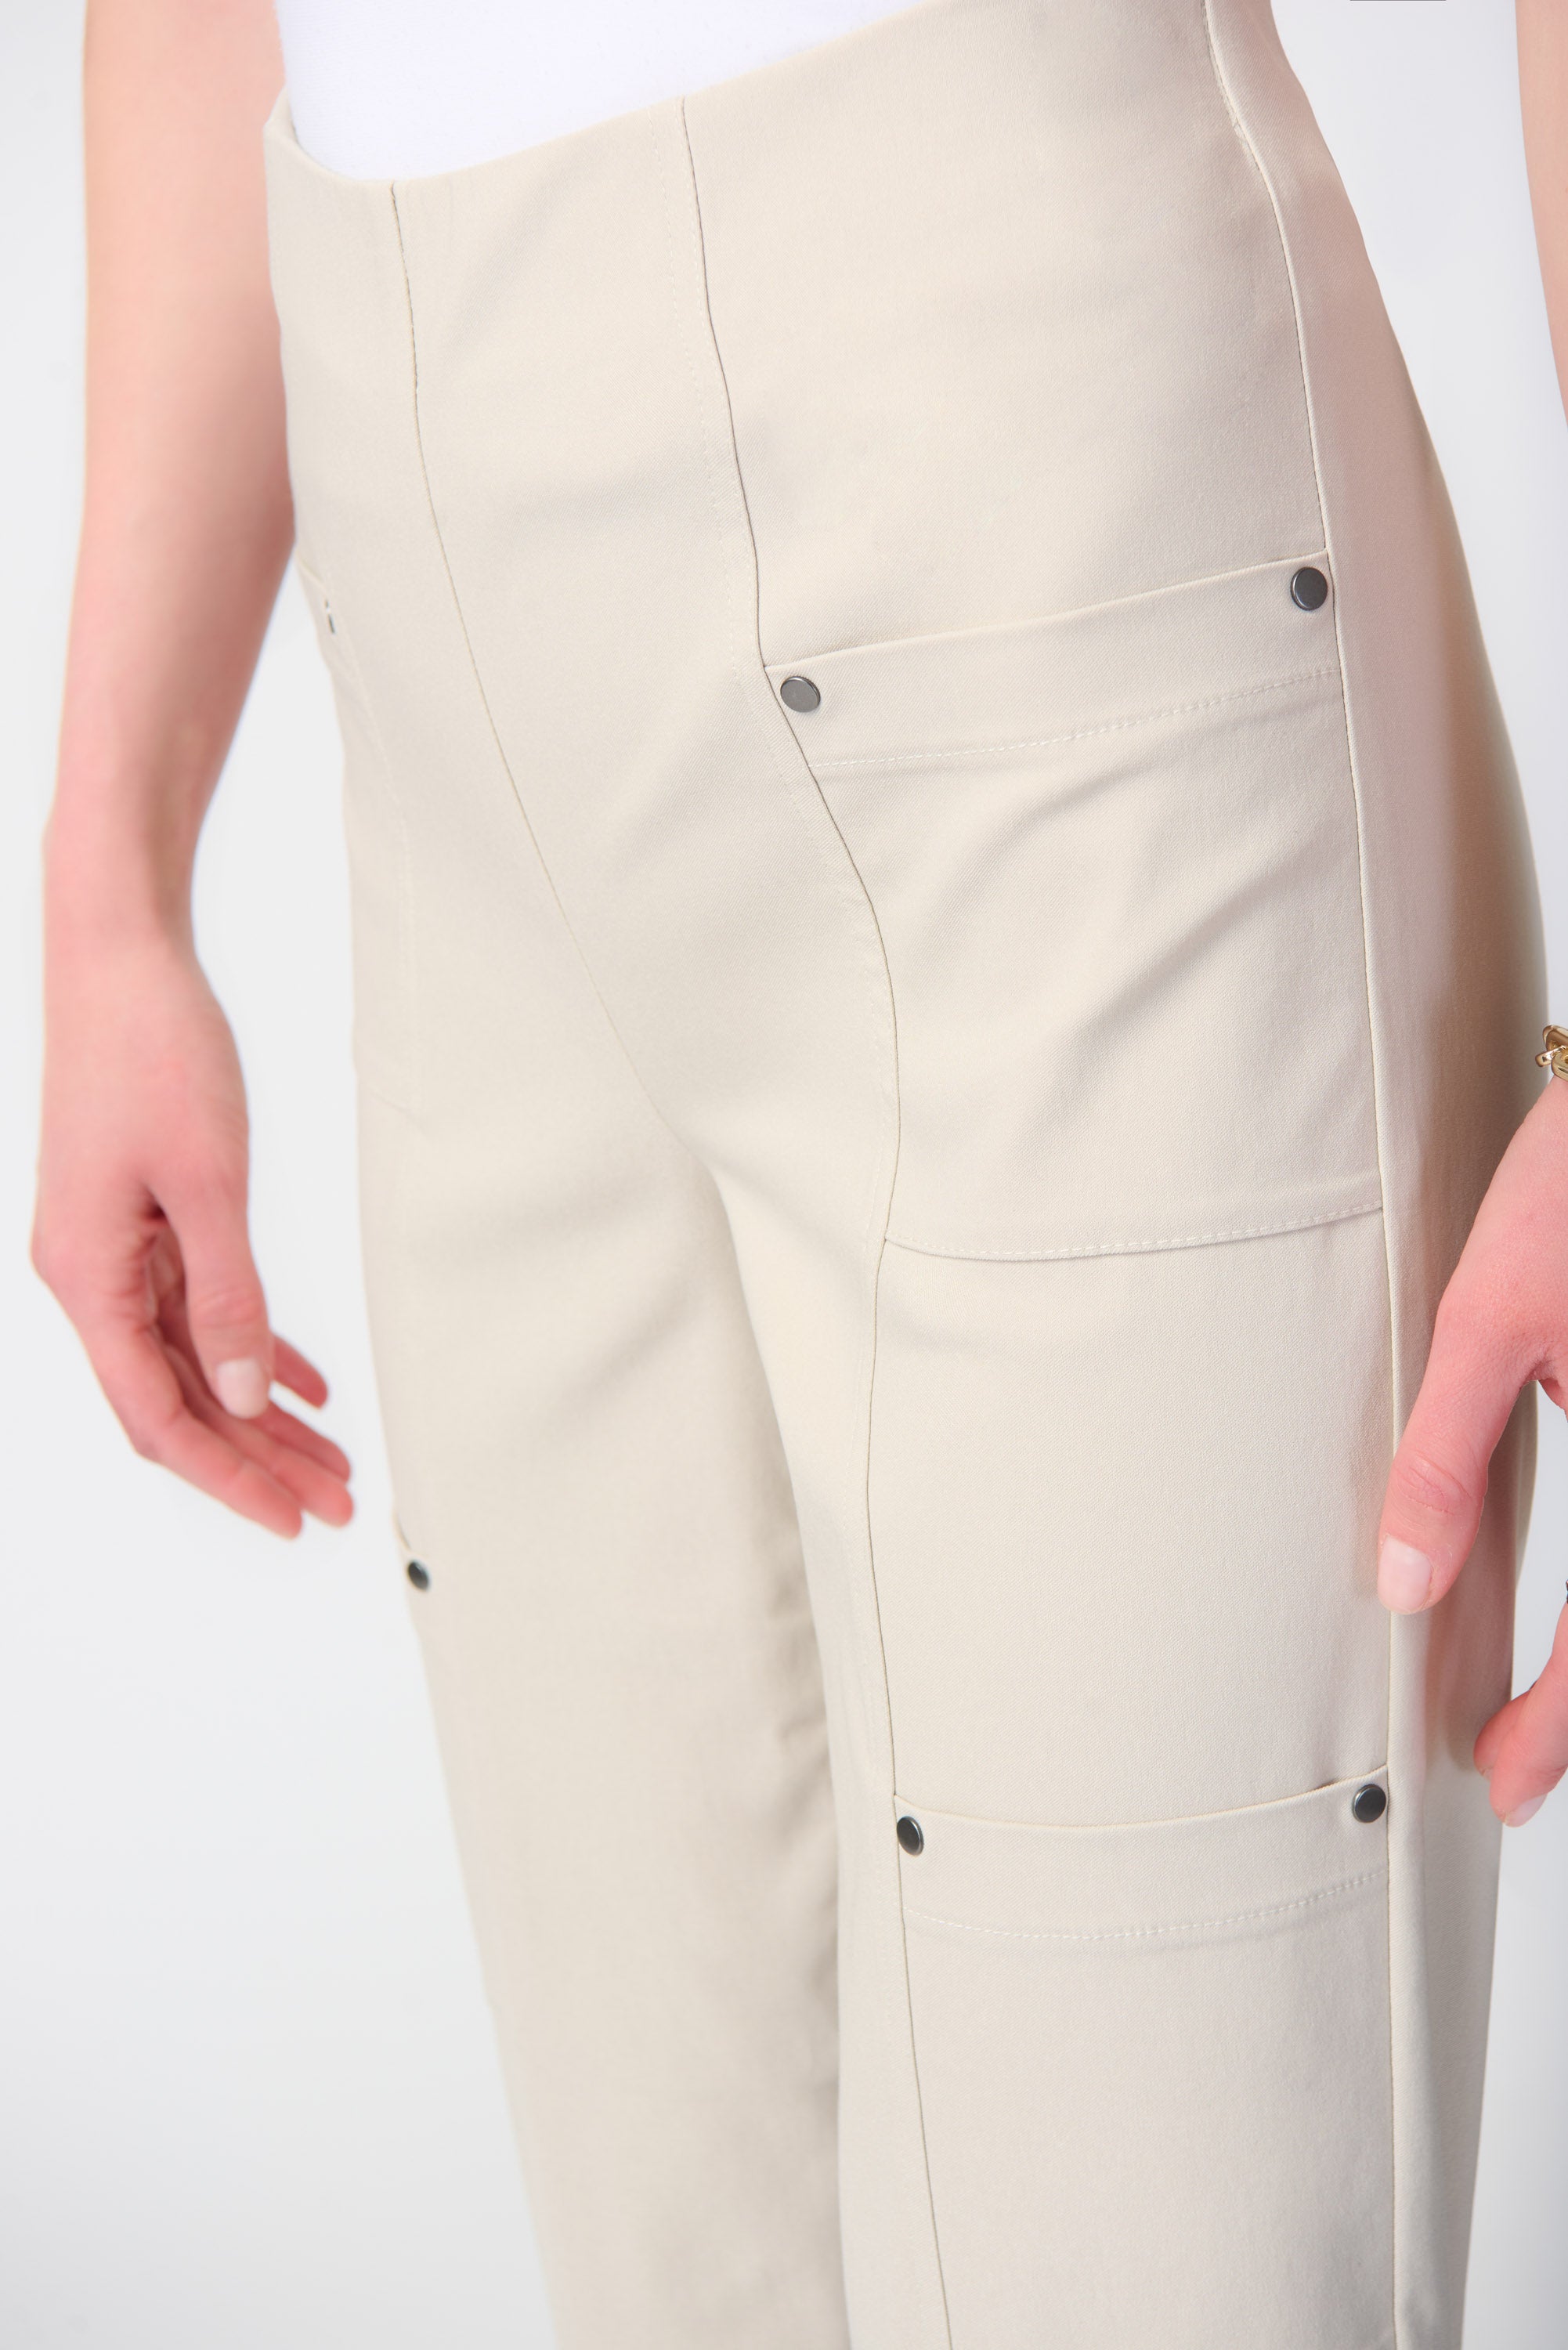 Close up of rivetted pockets on Joseph Ribkoff (241163) Women's Millennium Cropped Pull On Pants With Patch Pockets in Moonstone Beige